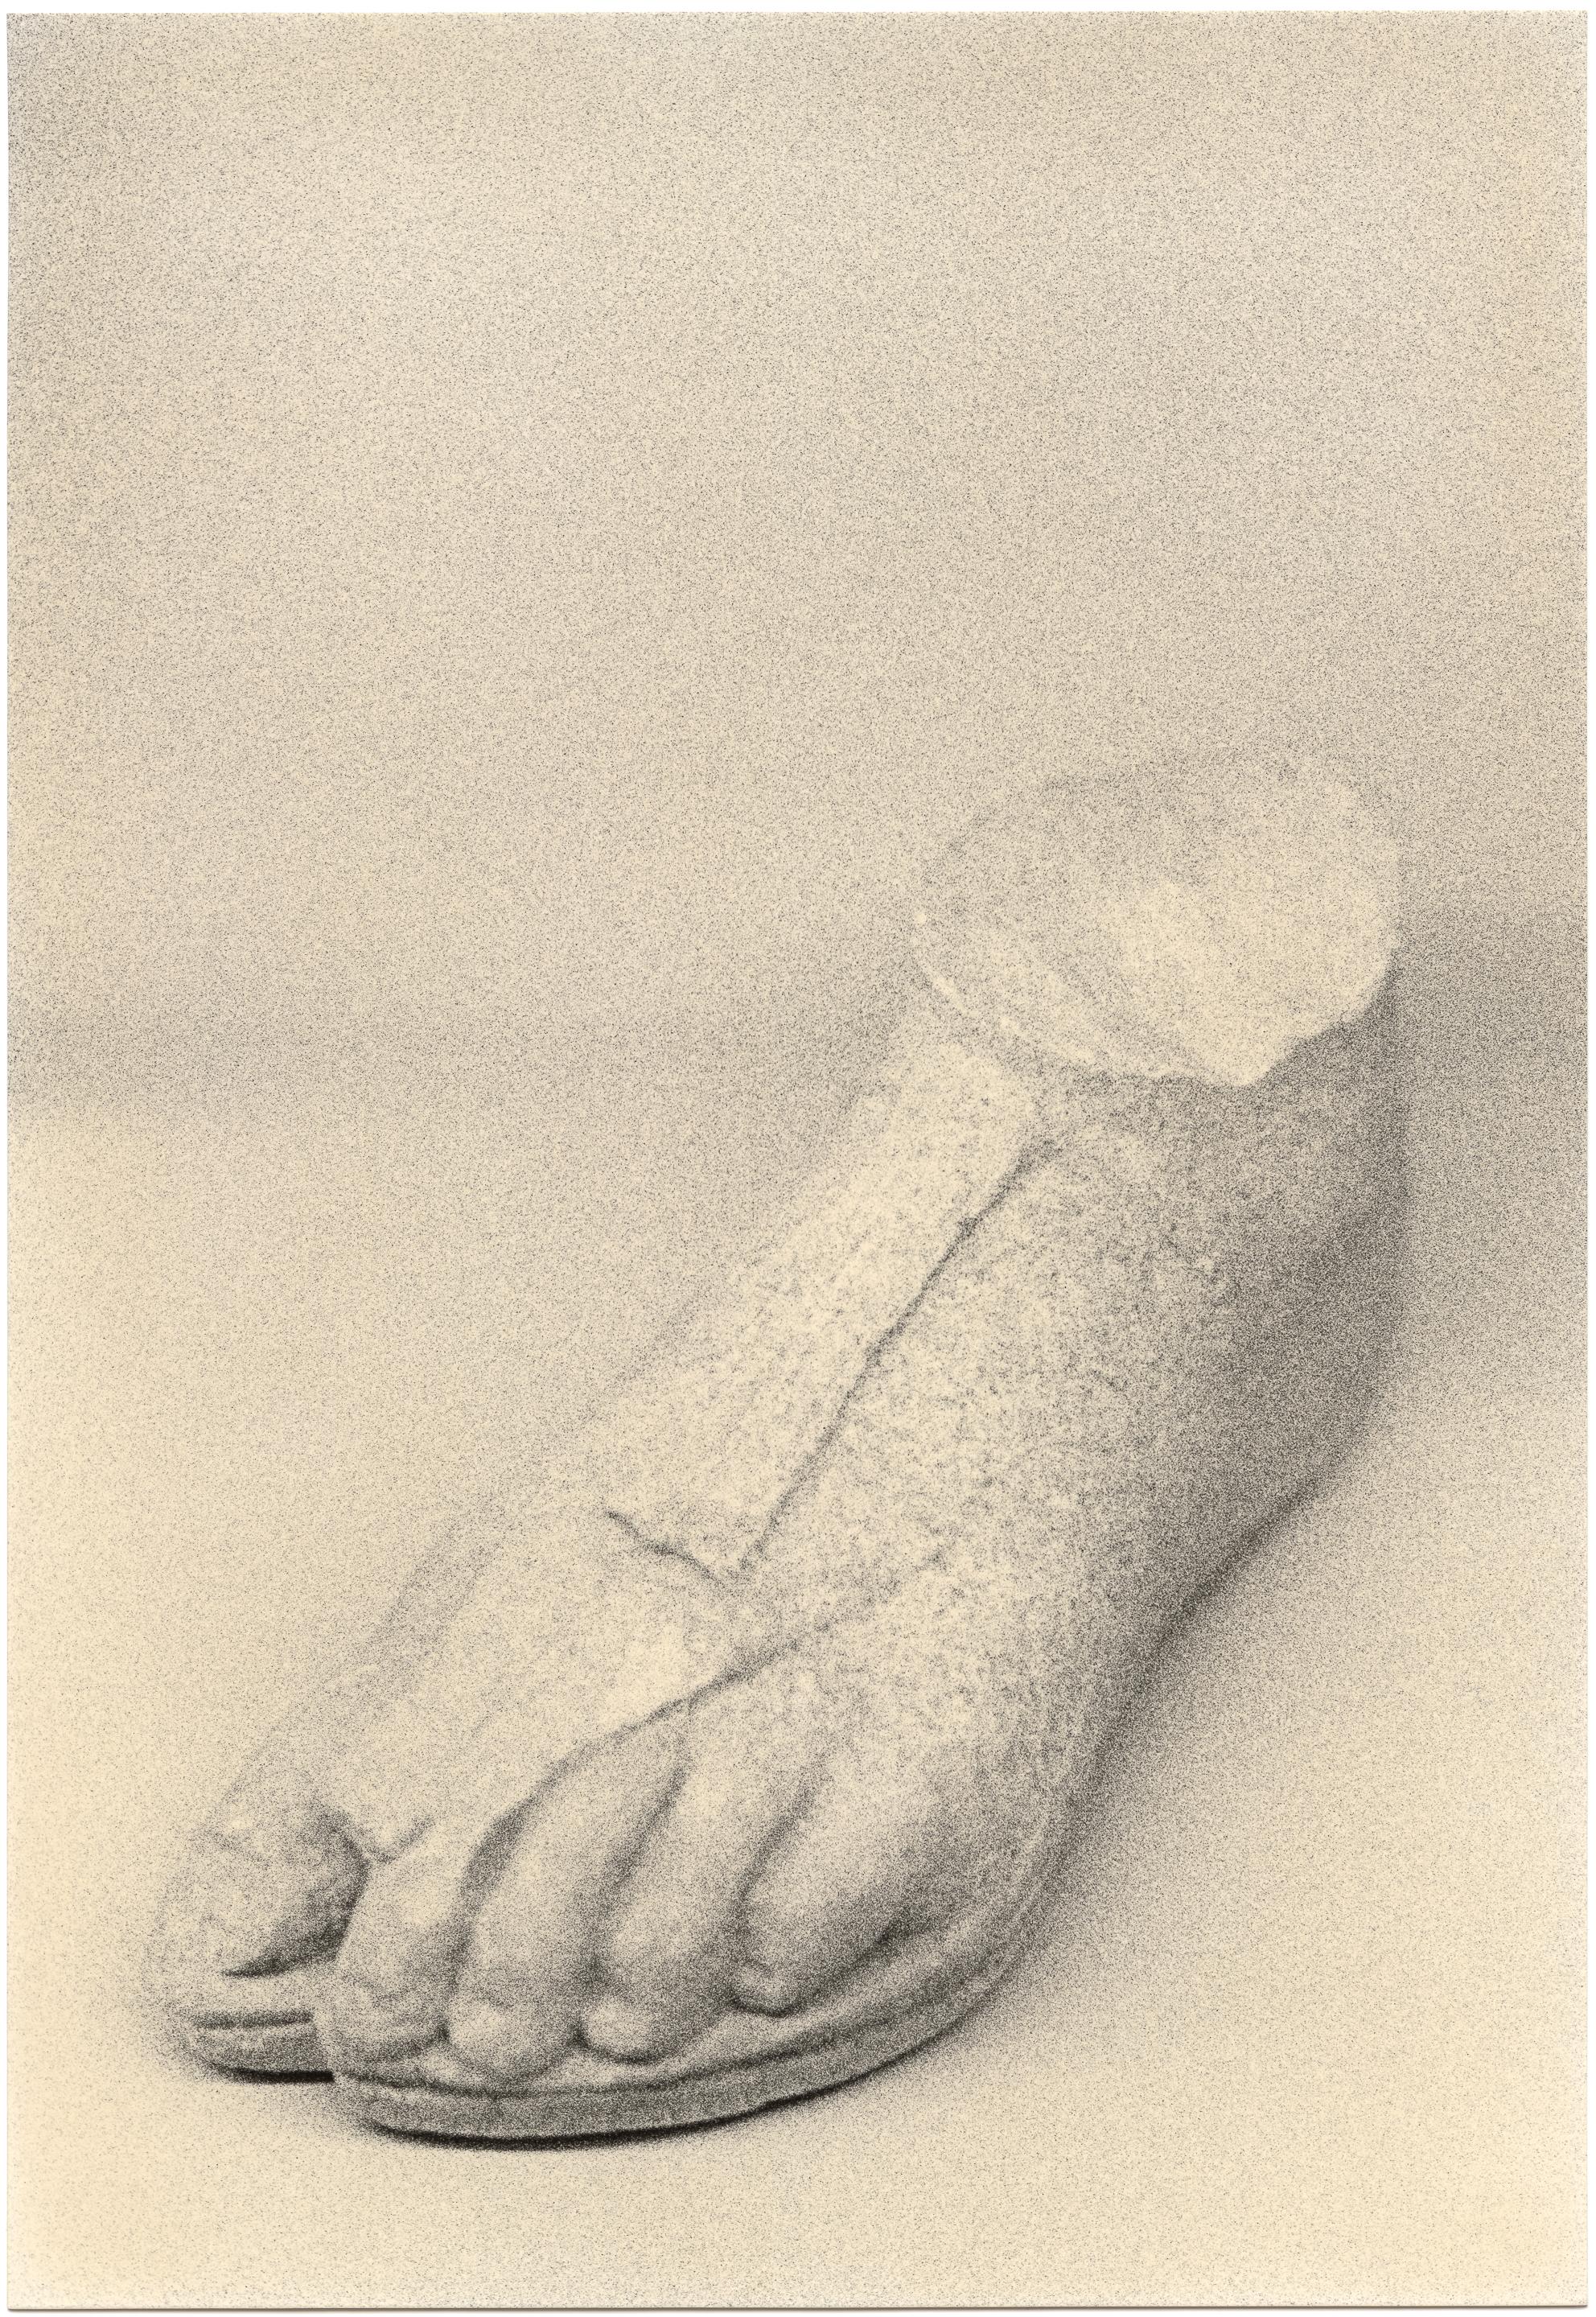 Mikael Siirilä Black and White Photograph - Untitled (stone foot)